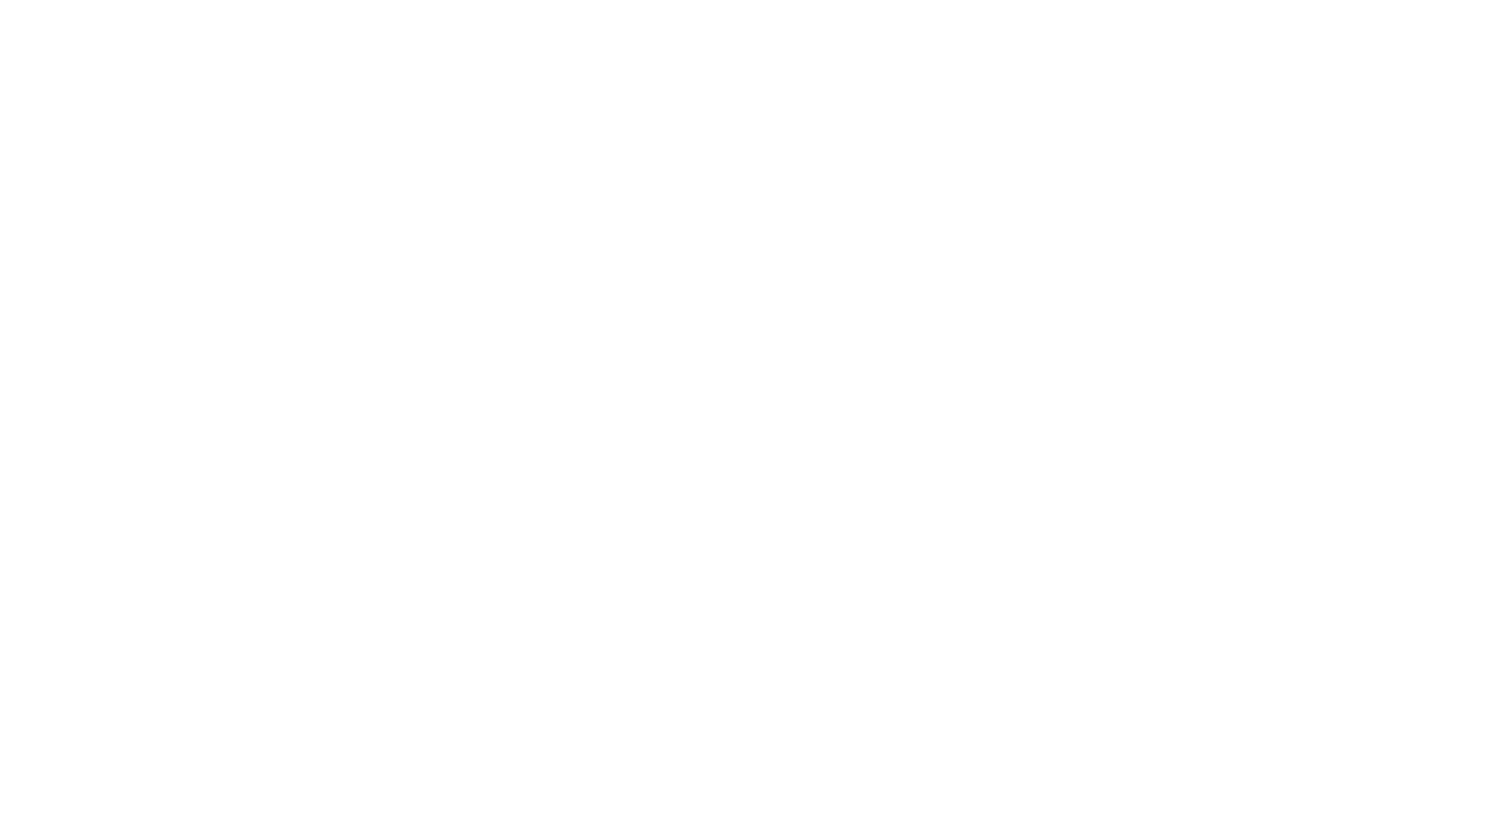 Eberle Building Products Agency Inc.